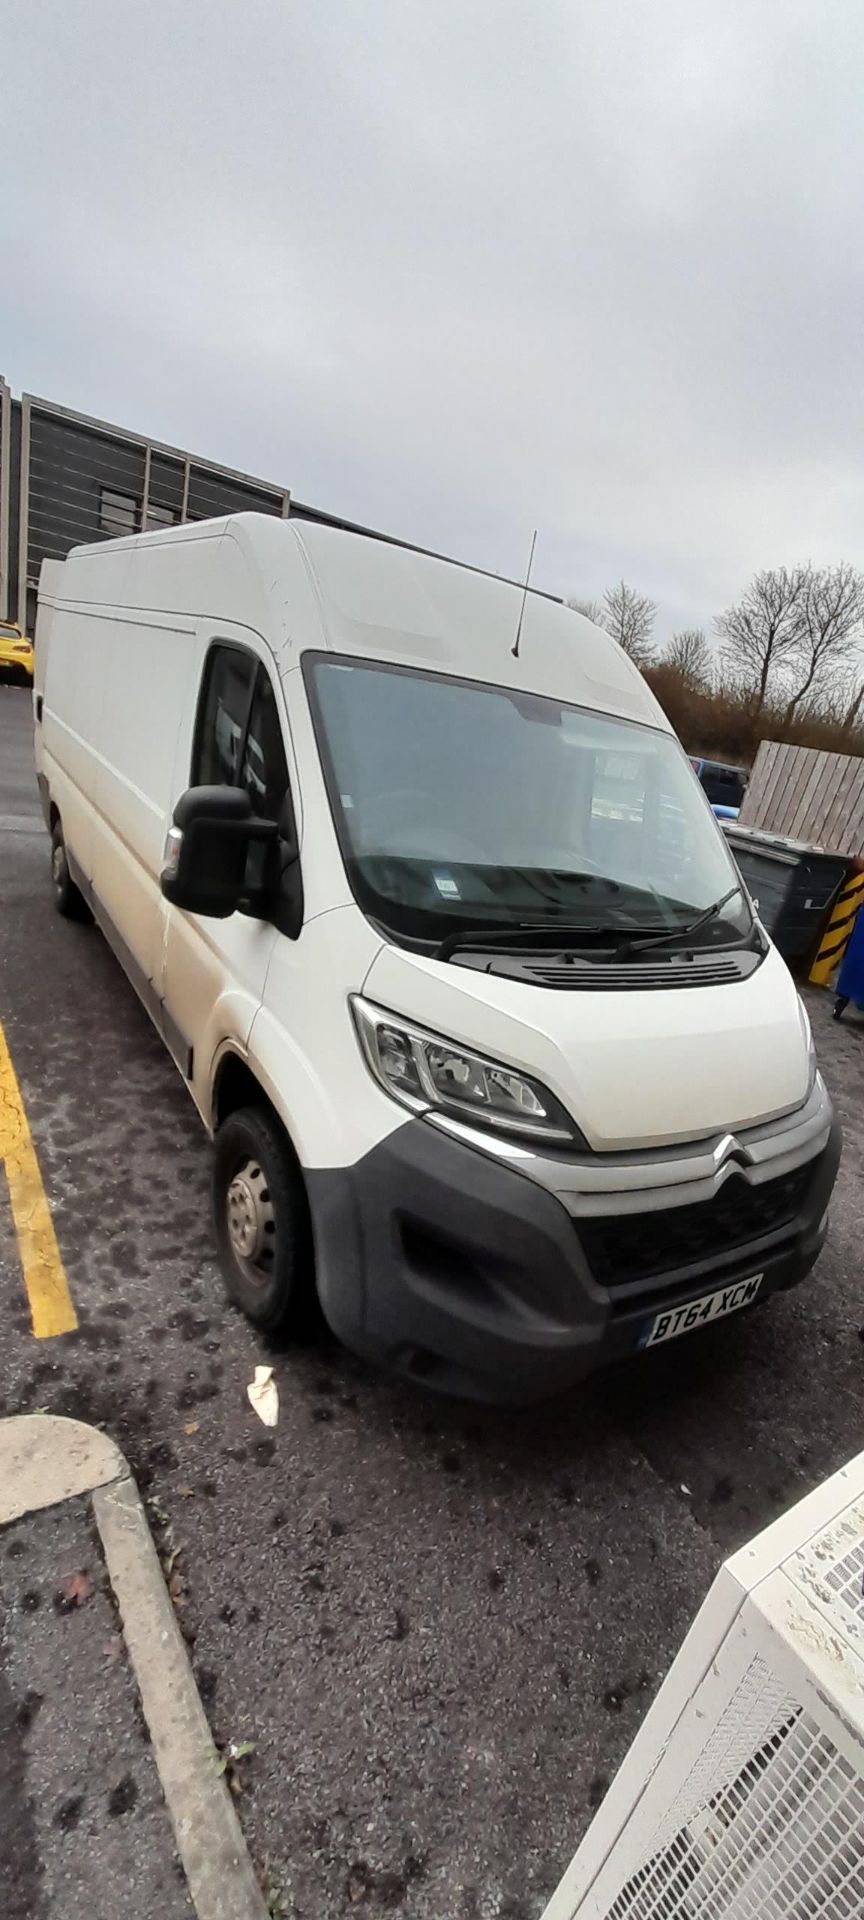 Citroen Relay Registration BT64 XCM, 104,109 miles - This vehicle does not have a V5C Document, the